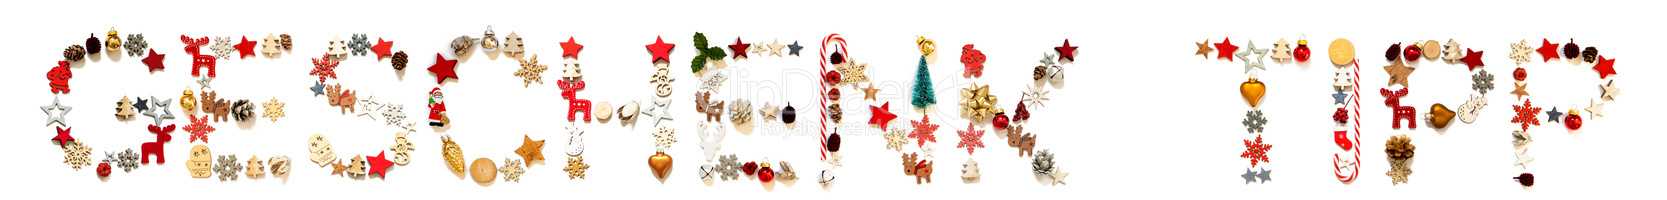 Colorful Christmas Decoration Letter Building Geschenk Tipp Means Gift Tip